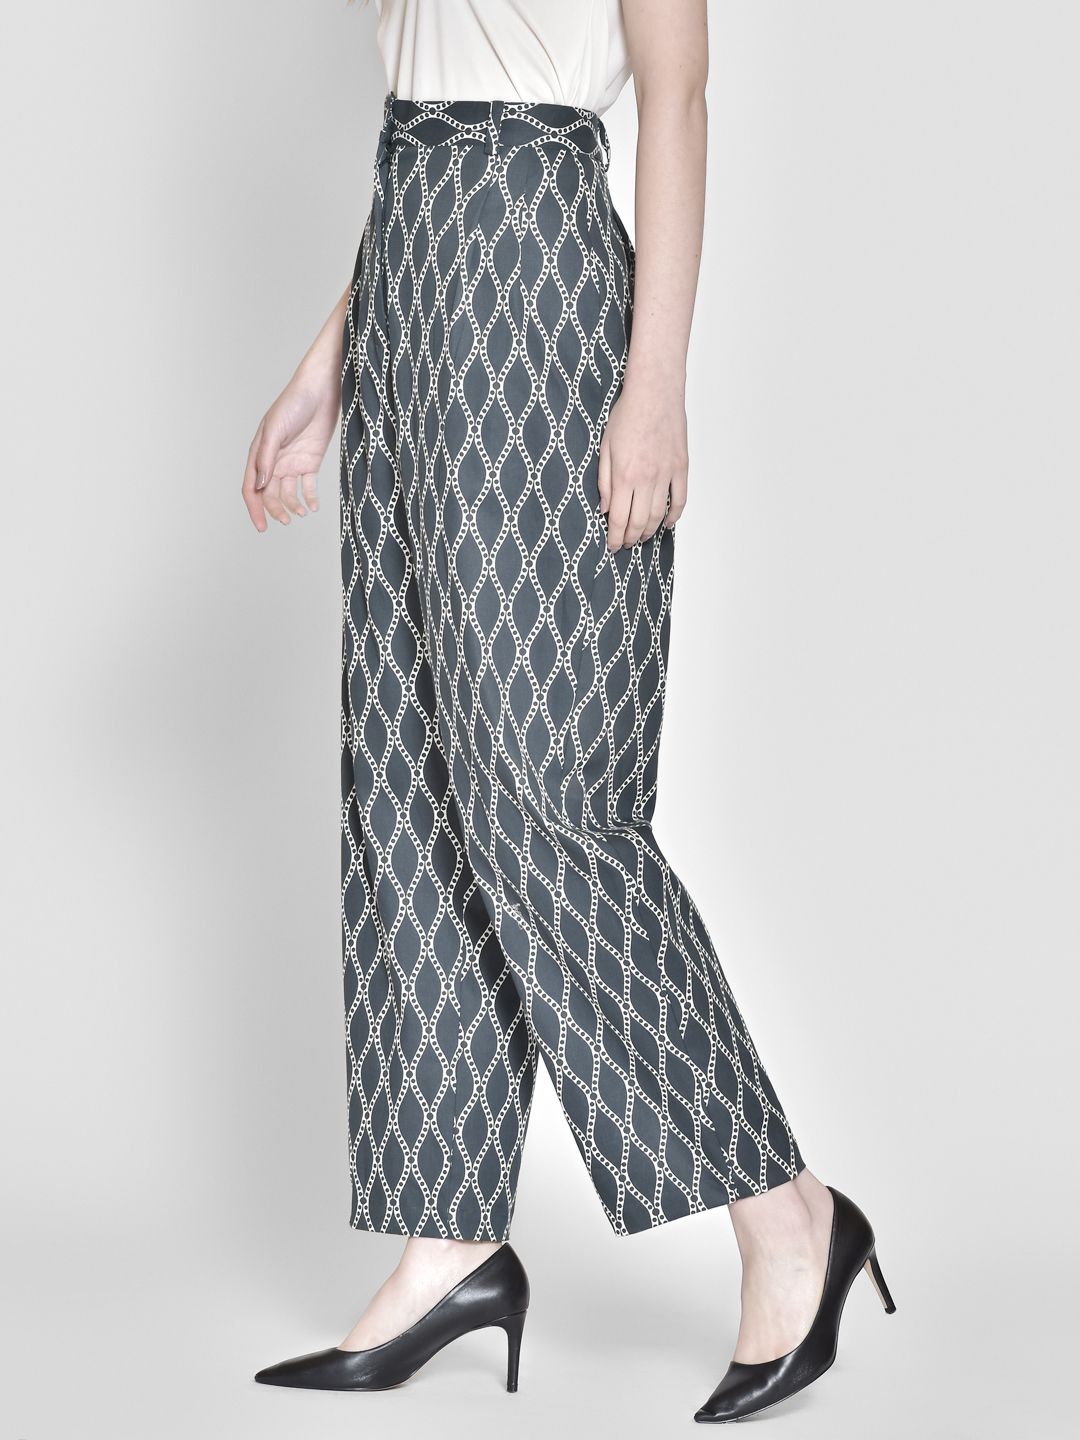 Textured Relaxed Fit Flat-Front Pants